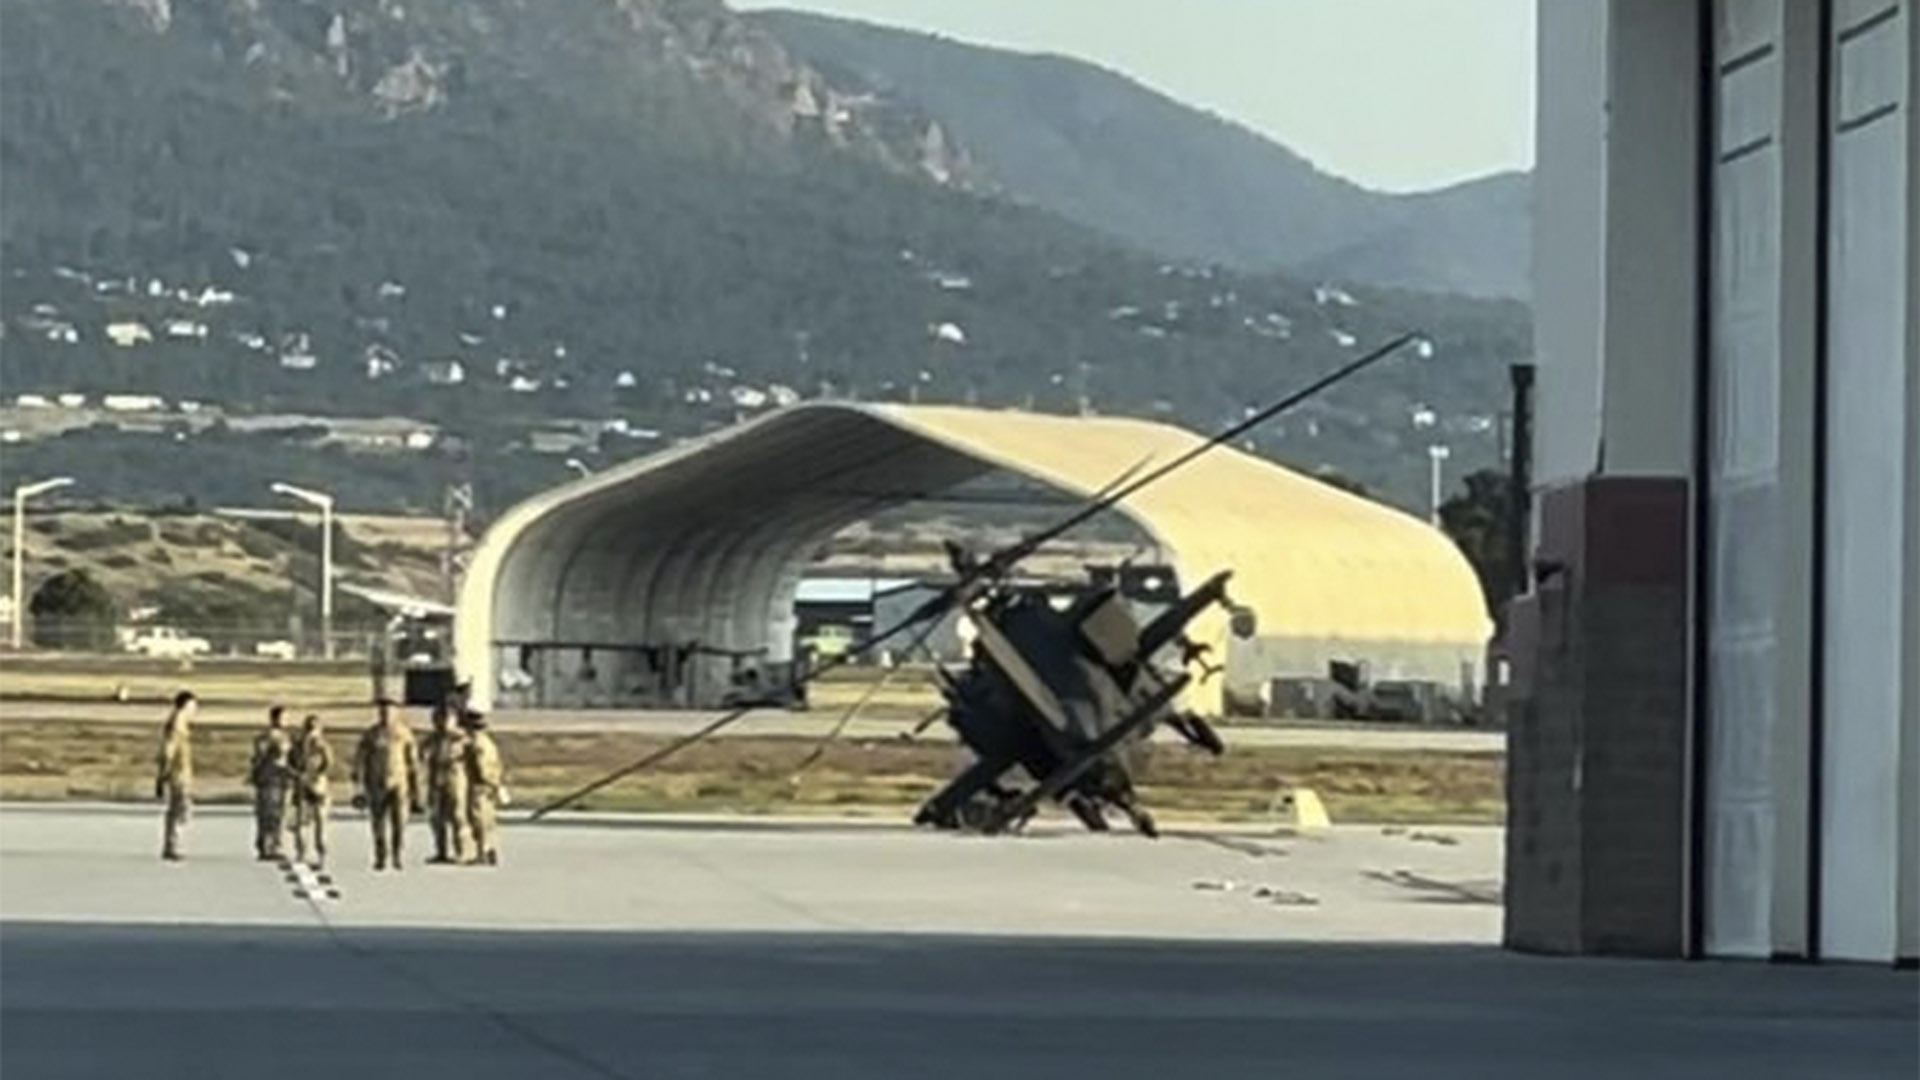 A helicopter knocked on its side after storms hit Fort Carson.